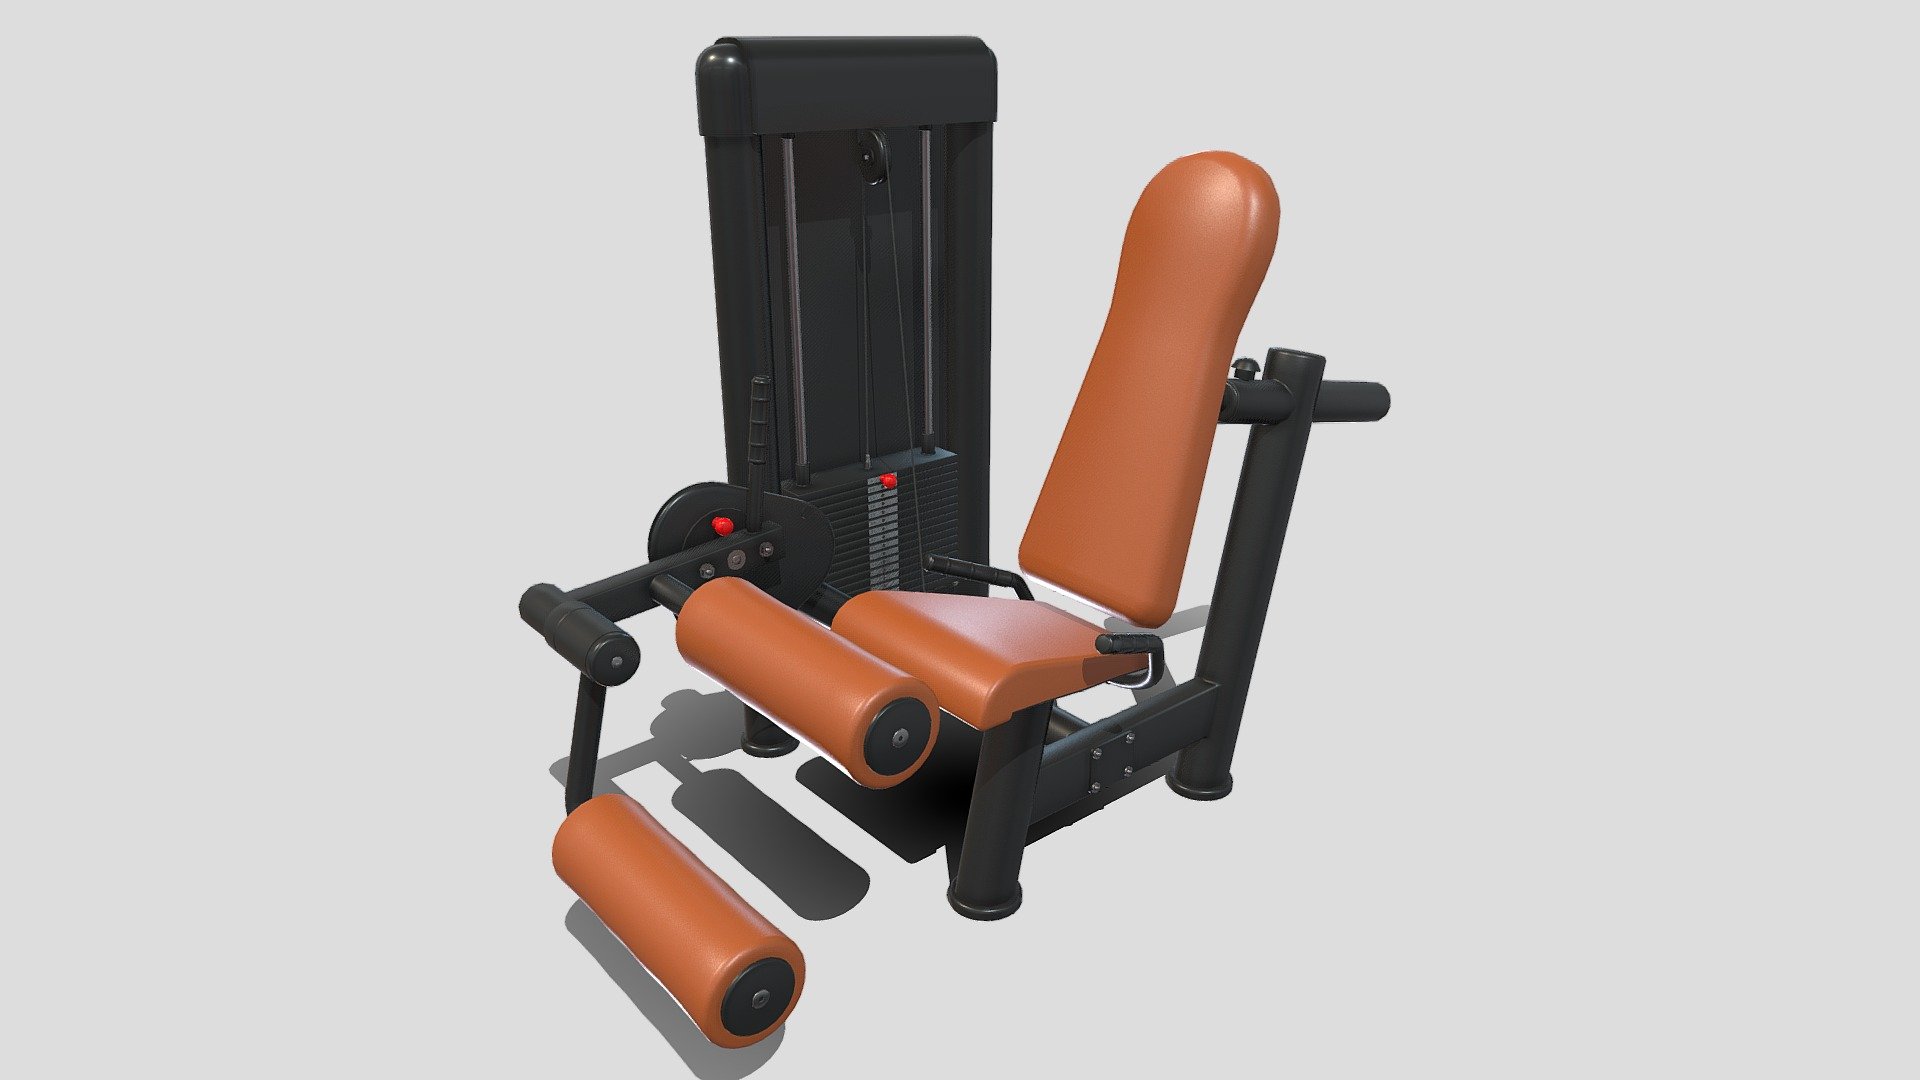 Gym machine 3d model built to real size, rendered with Cycles in Blender, as per seen on attached images. 

File formats:
-.blend, rendered with cycles, as seen in the images;
-.obj, with materials applied;
-.dae, with materials applied;
-.fbx, with materials applied;
-.stl;

Files come named appropriately and split by file format.

3D Software:
The 3D model was originally created in Blender 3.1 and rendered with Cycles.

Materials and textures:
The models have materials applied in all formats, and are ready to import and render.
Materials are image based using PBR, the model comes with five 4k png image textures.

Preview scenes:
The preview images are rendered in Blender using its built-in render engine &lsquo;Cycles'.
Note that the blend files come directly with the rendering scene included and the render command will generate the exact result as seen in previews.

General:
The models are built mostly out of quads.

For any problems please feel free to contact me.

Don't forget to rate and enjoy! - Leg curling machine - Buy Royalty Free 3D model by dragosburian 3d model